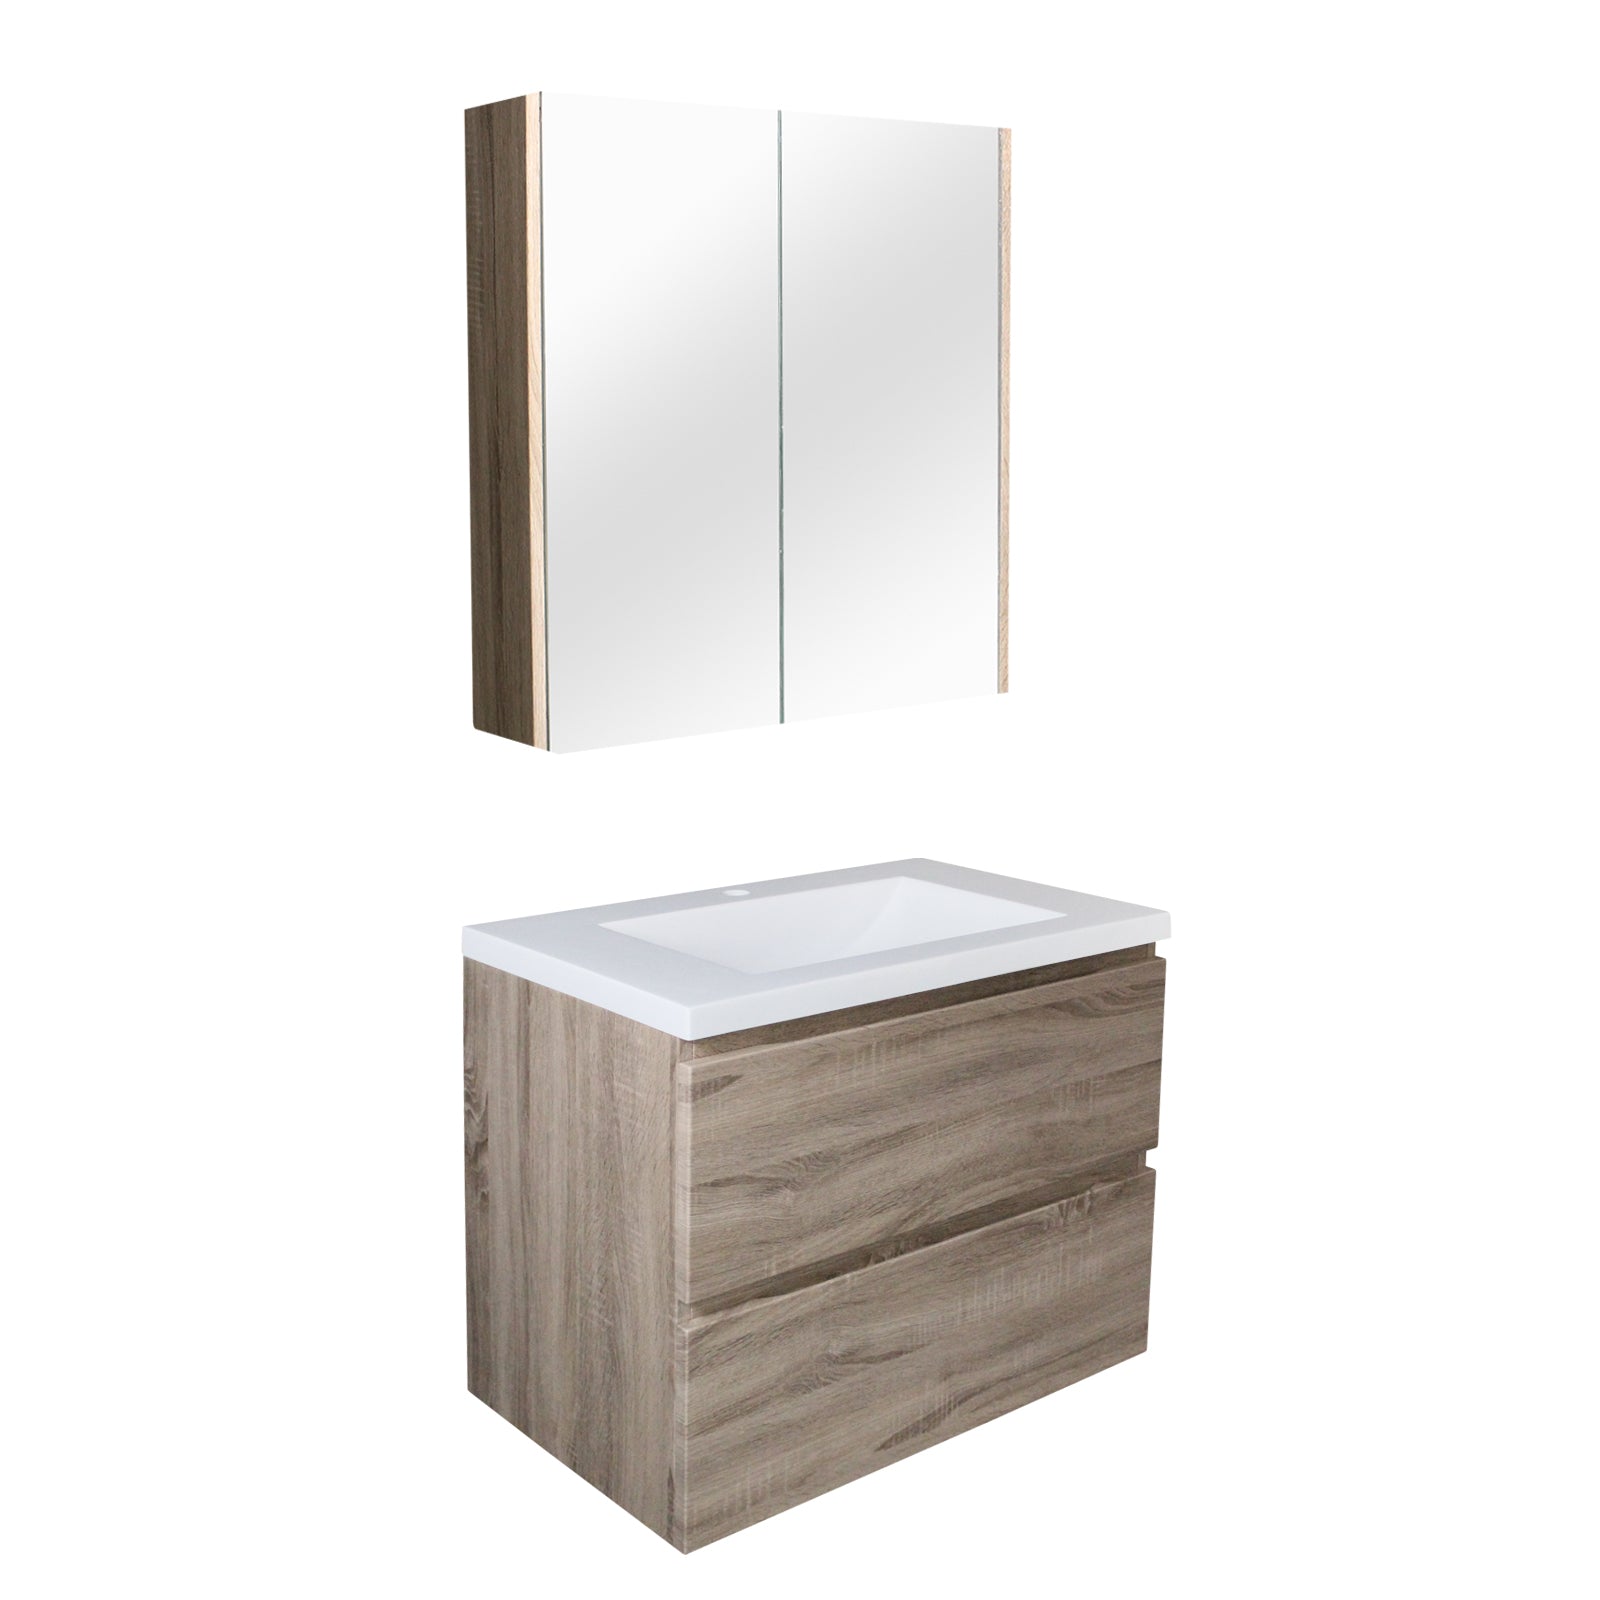 POSEIDON WHITE OAK QSVWO QUBIST MIRROR SHAVING CABINET (AVAILABLE IN 600MM, 750MM AND 900MM)